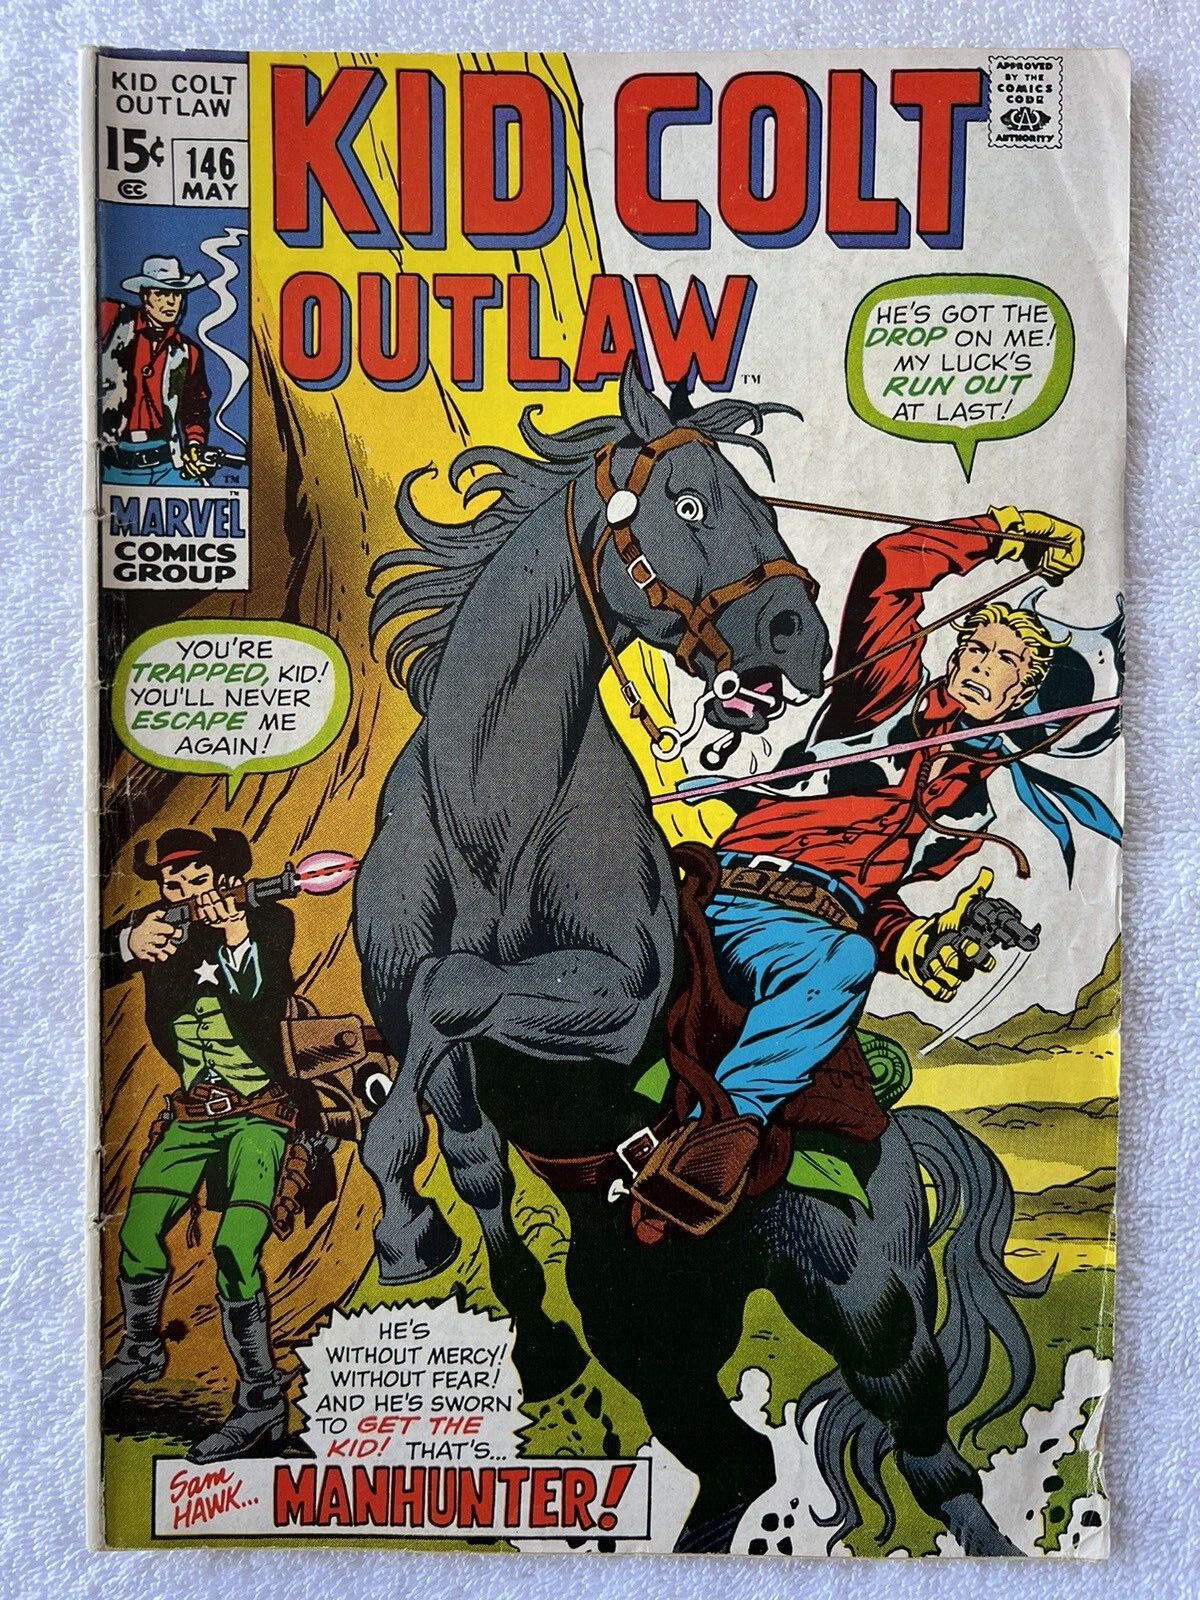 Kid Colt Outlaw #146, May 1970